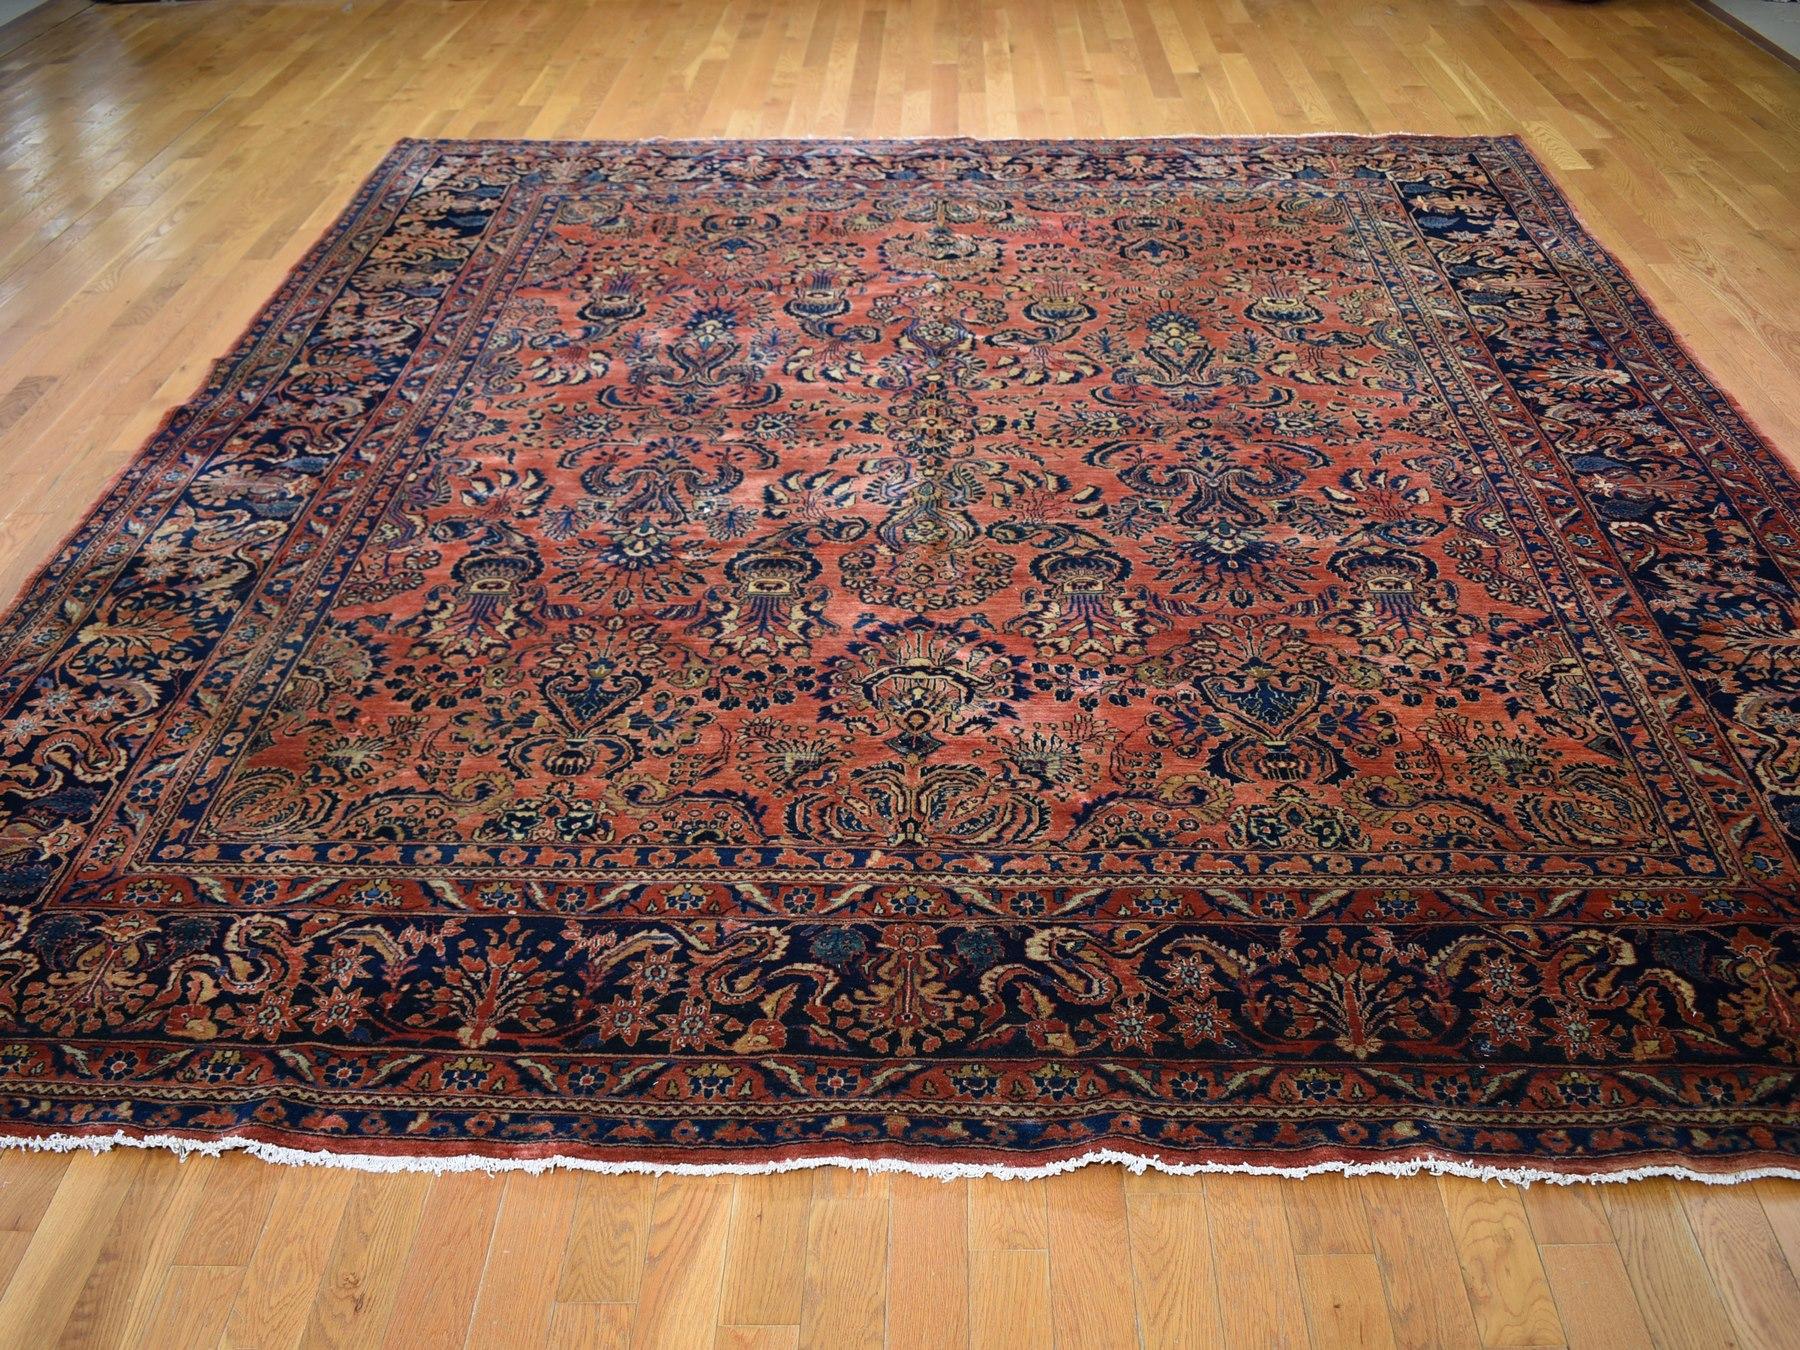 Medieval Coral Antique Persian Sarouk Squarish Hand Knotted oriental Rug, 10'4